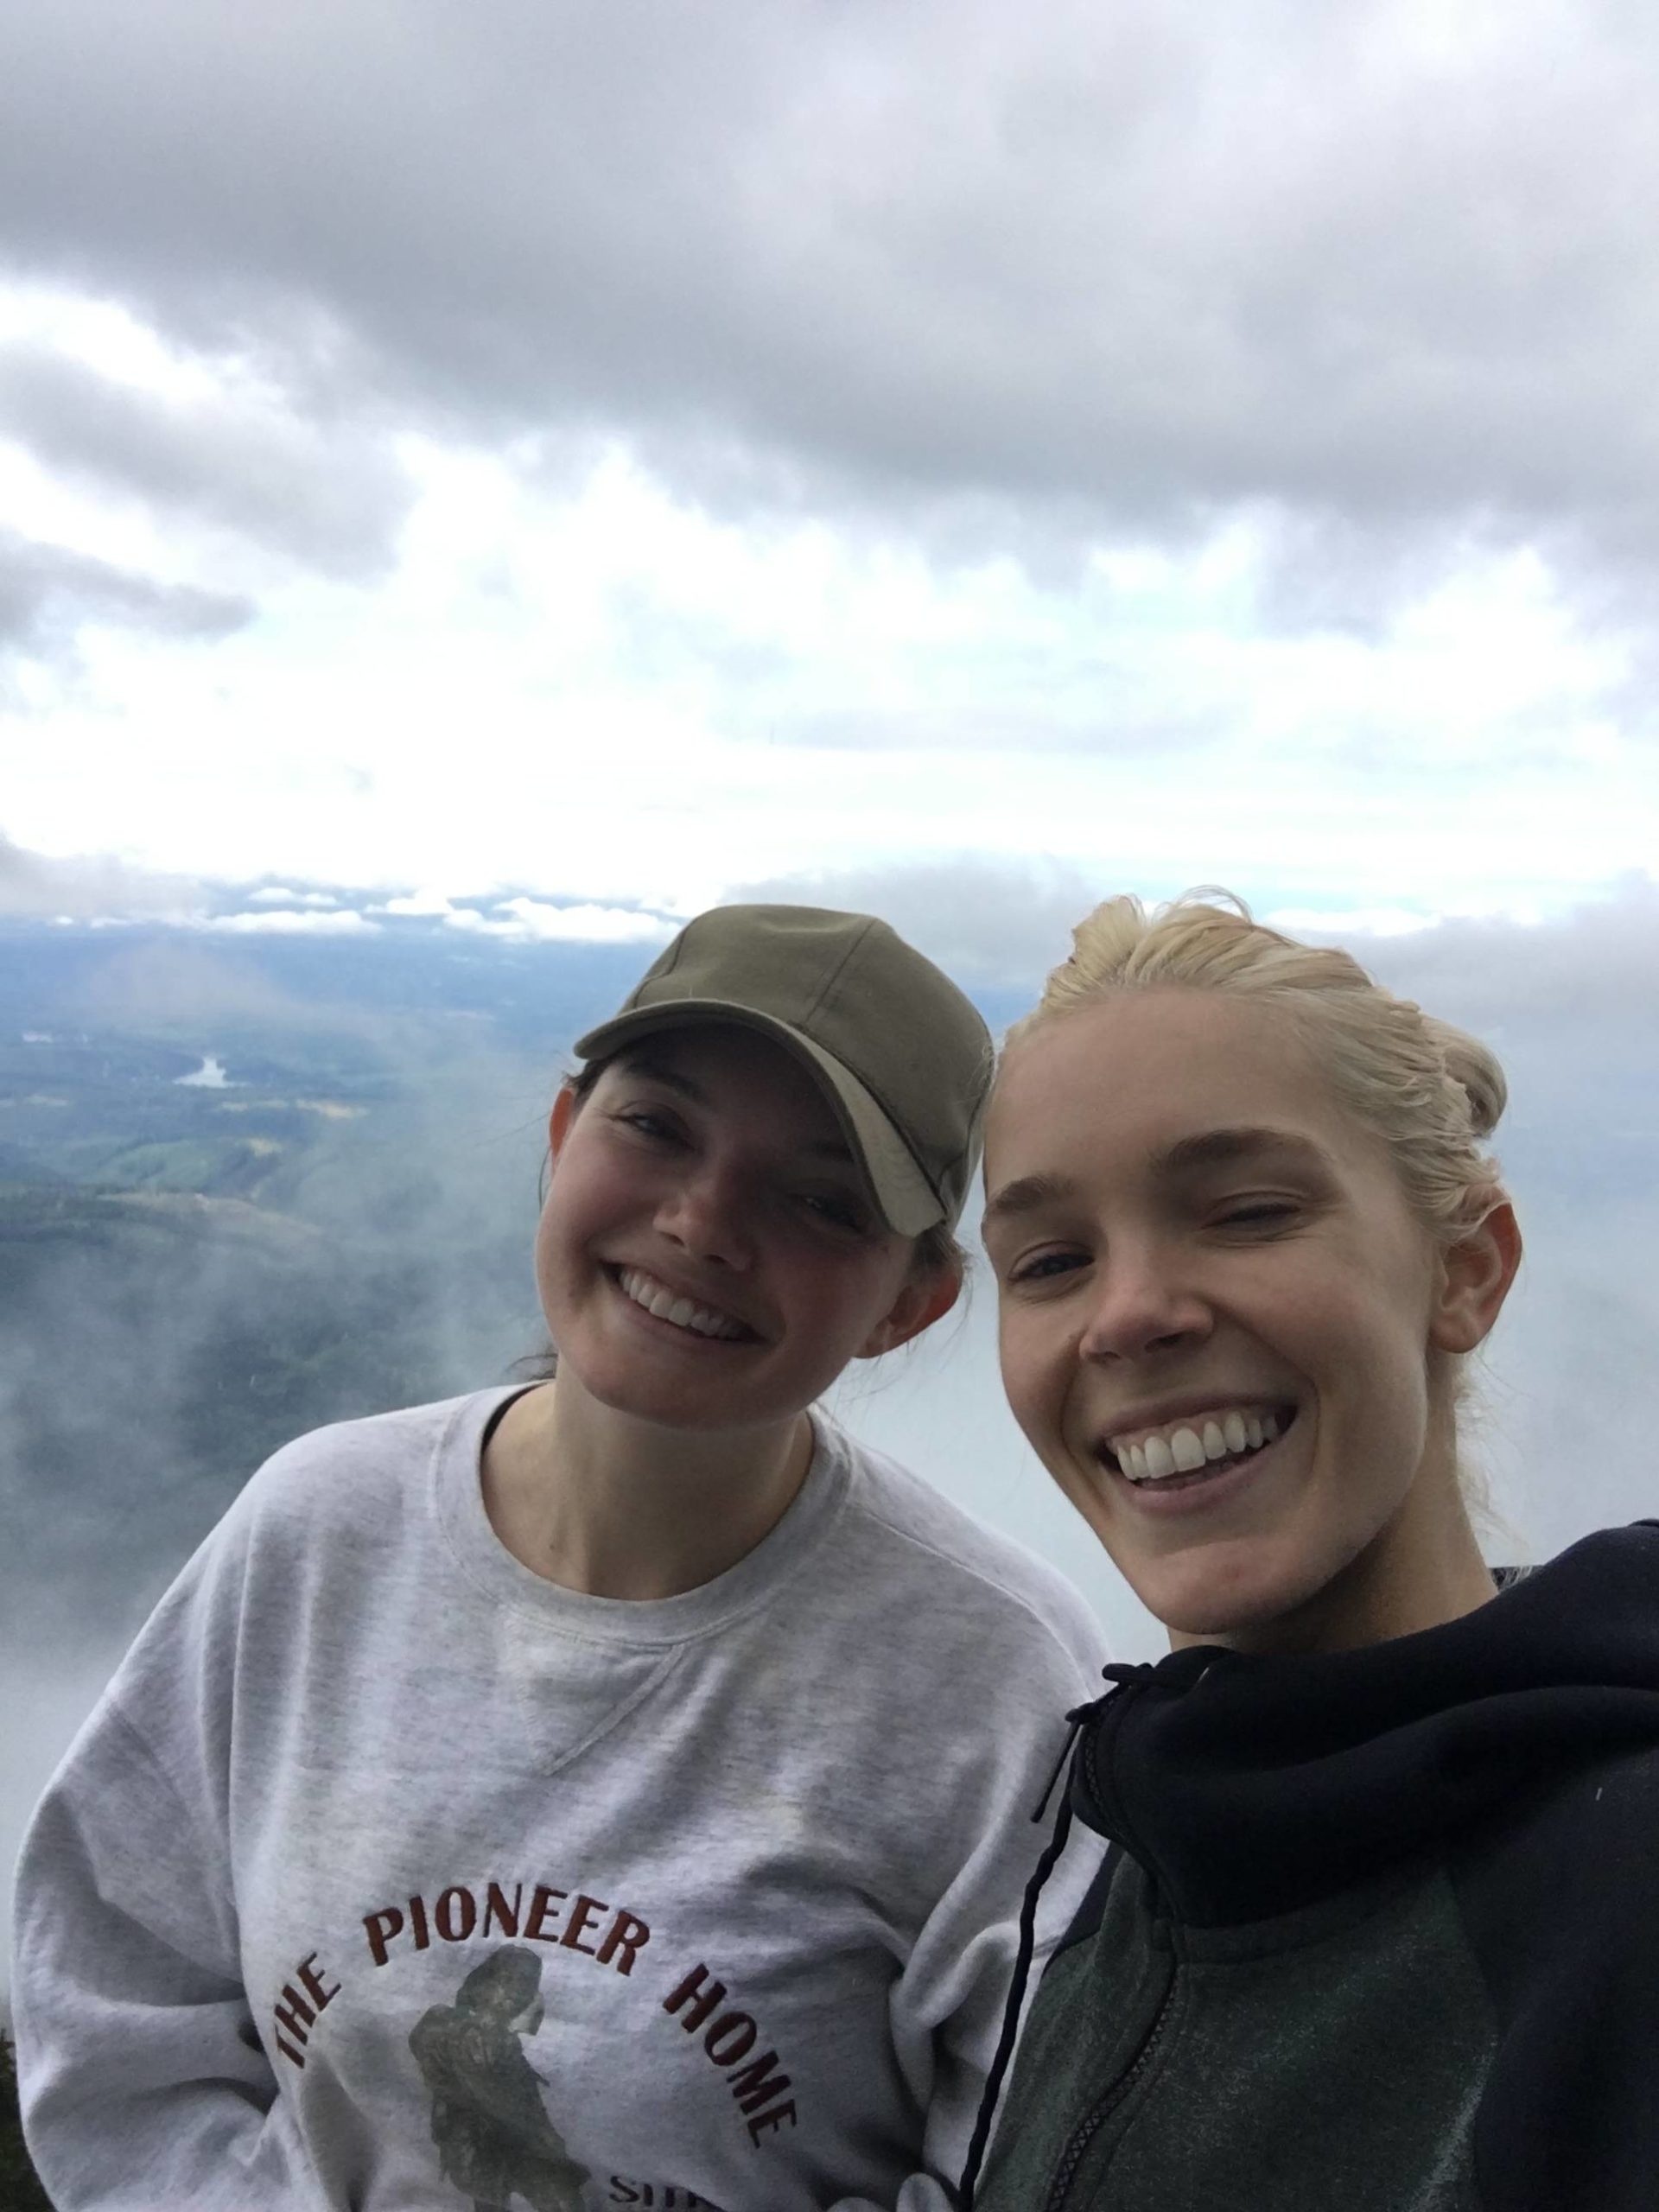 Gigi Gillie, left, and Alex Taylor at the top of Mount Pilchuck at the old fire lookout tower. Photo courtesy of Alex Taylor